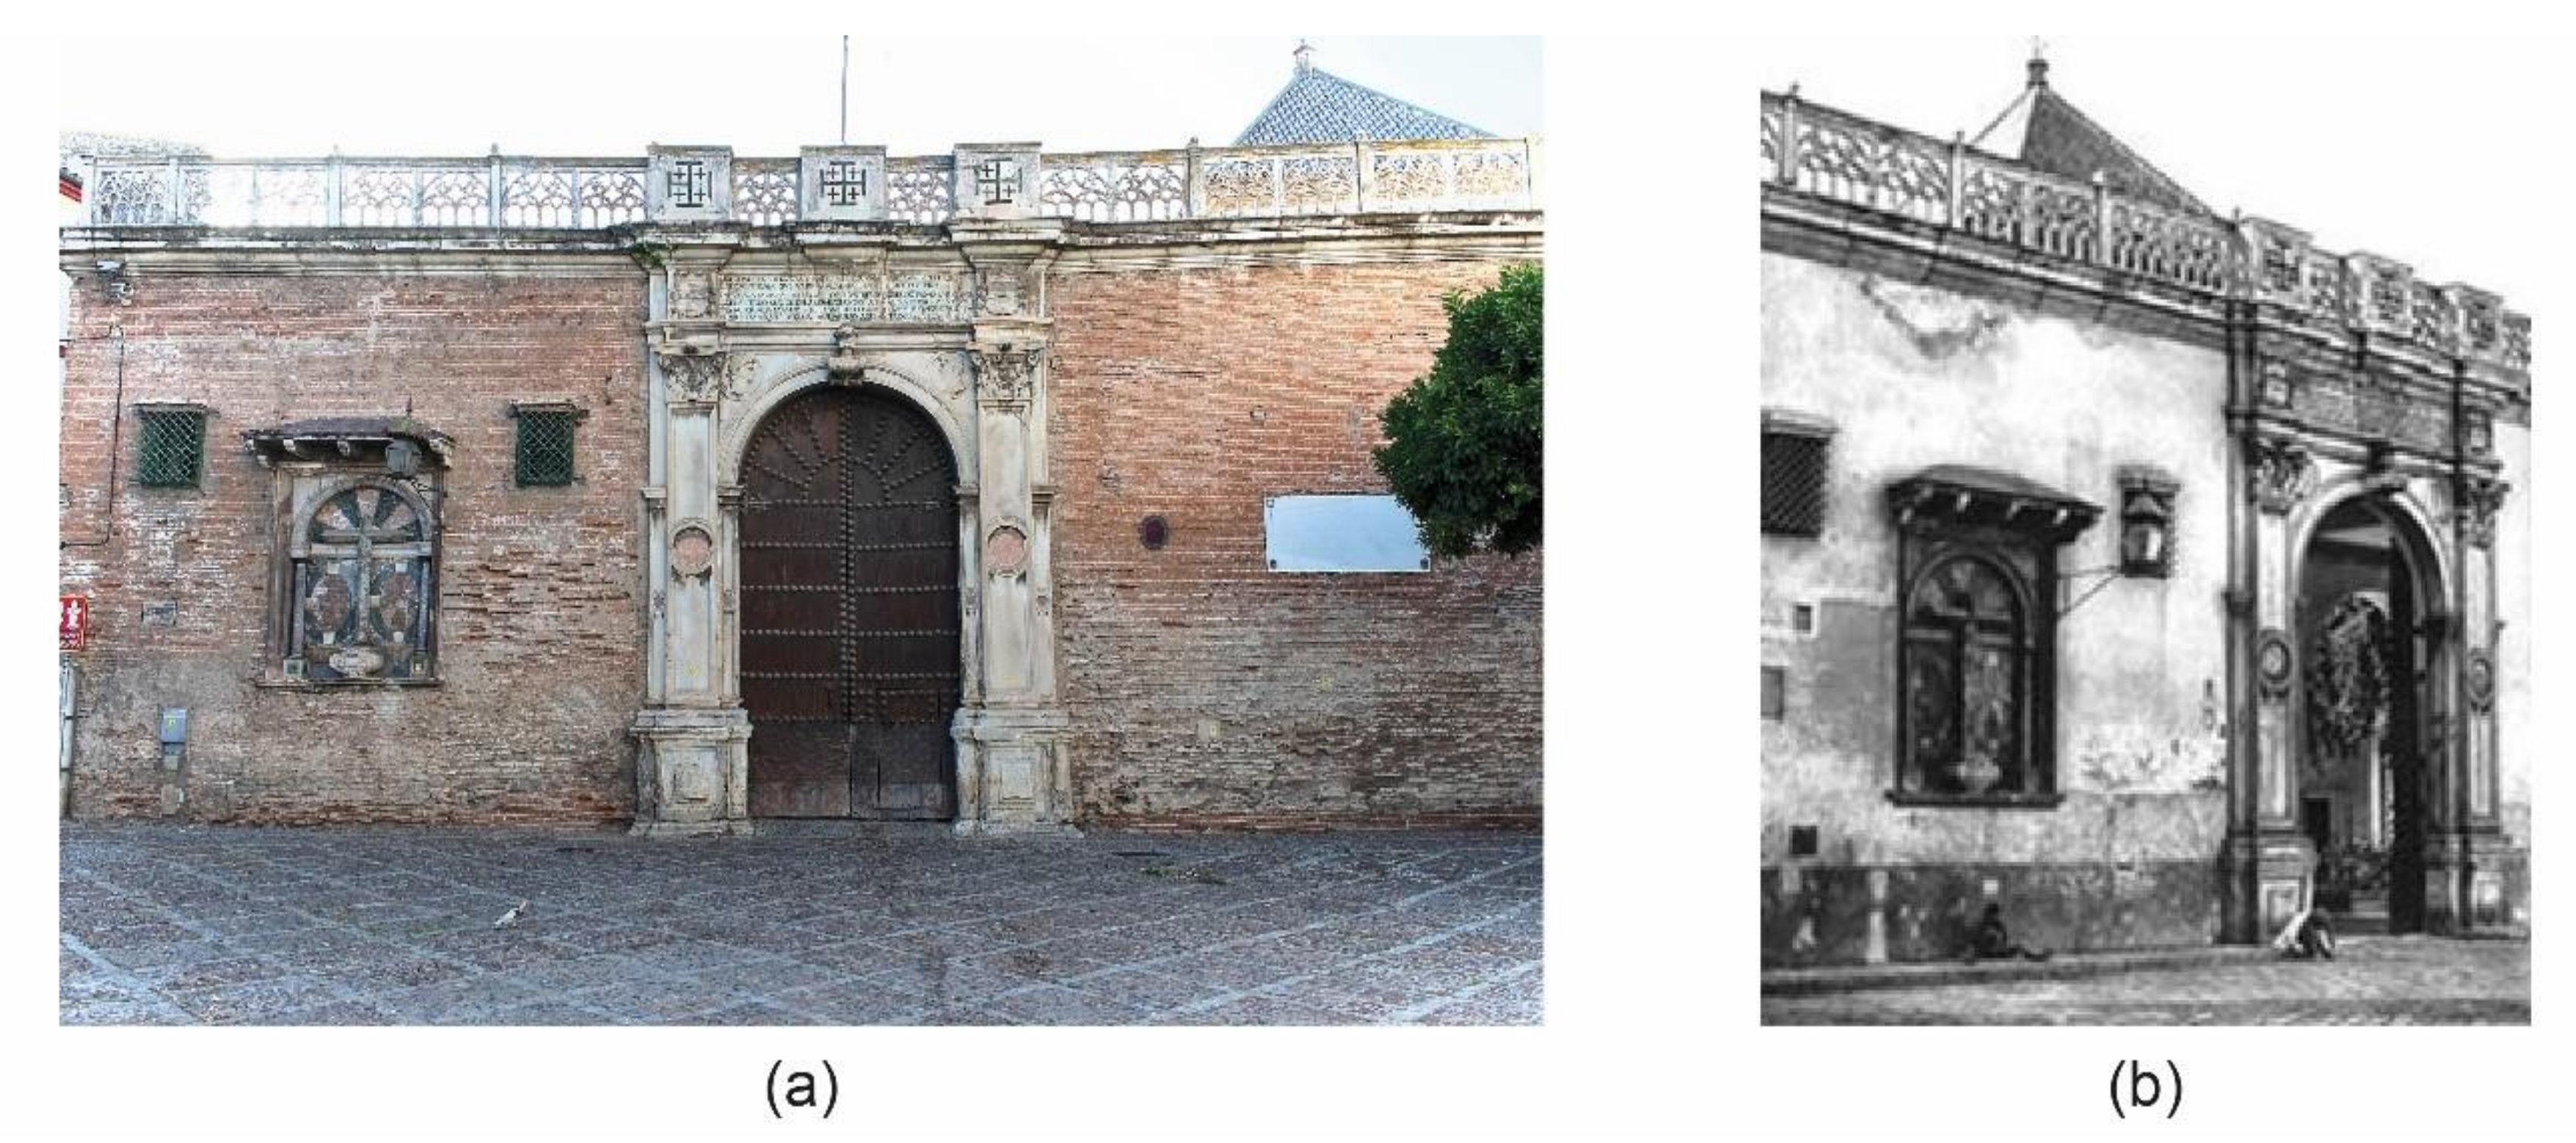 Remote Sensing | Free Full-Text | Validation of Close-Range Photogrammetry  for Architectural and Archaeological Heritage: Analysis of Point Density  and 3D Mesh Geometry | HTML